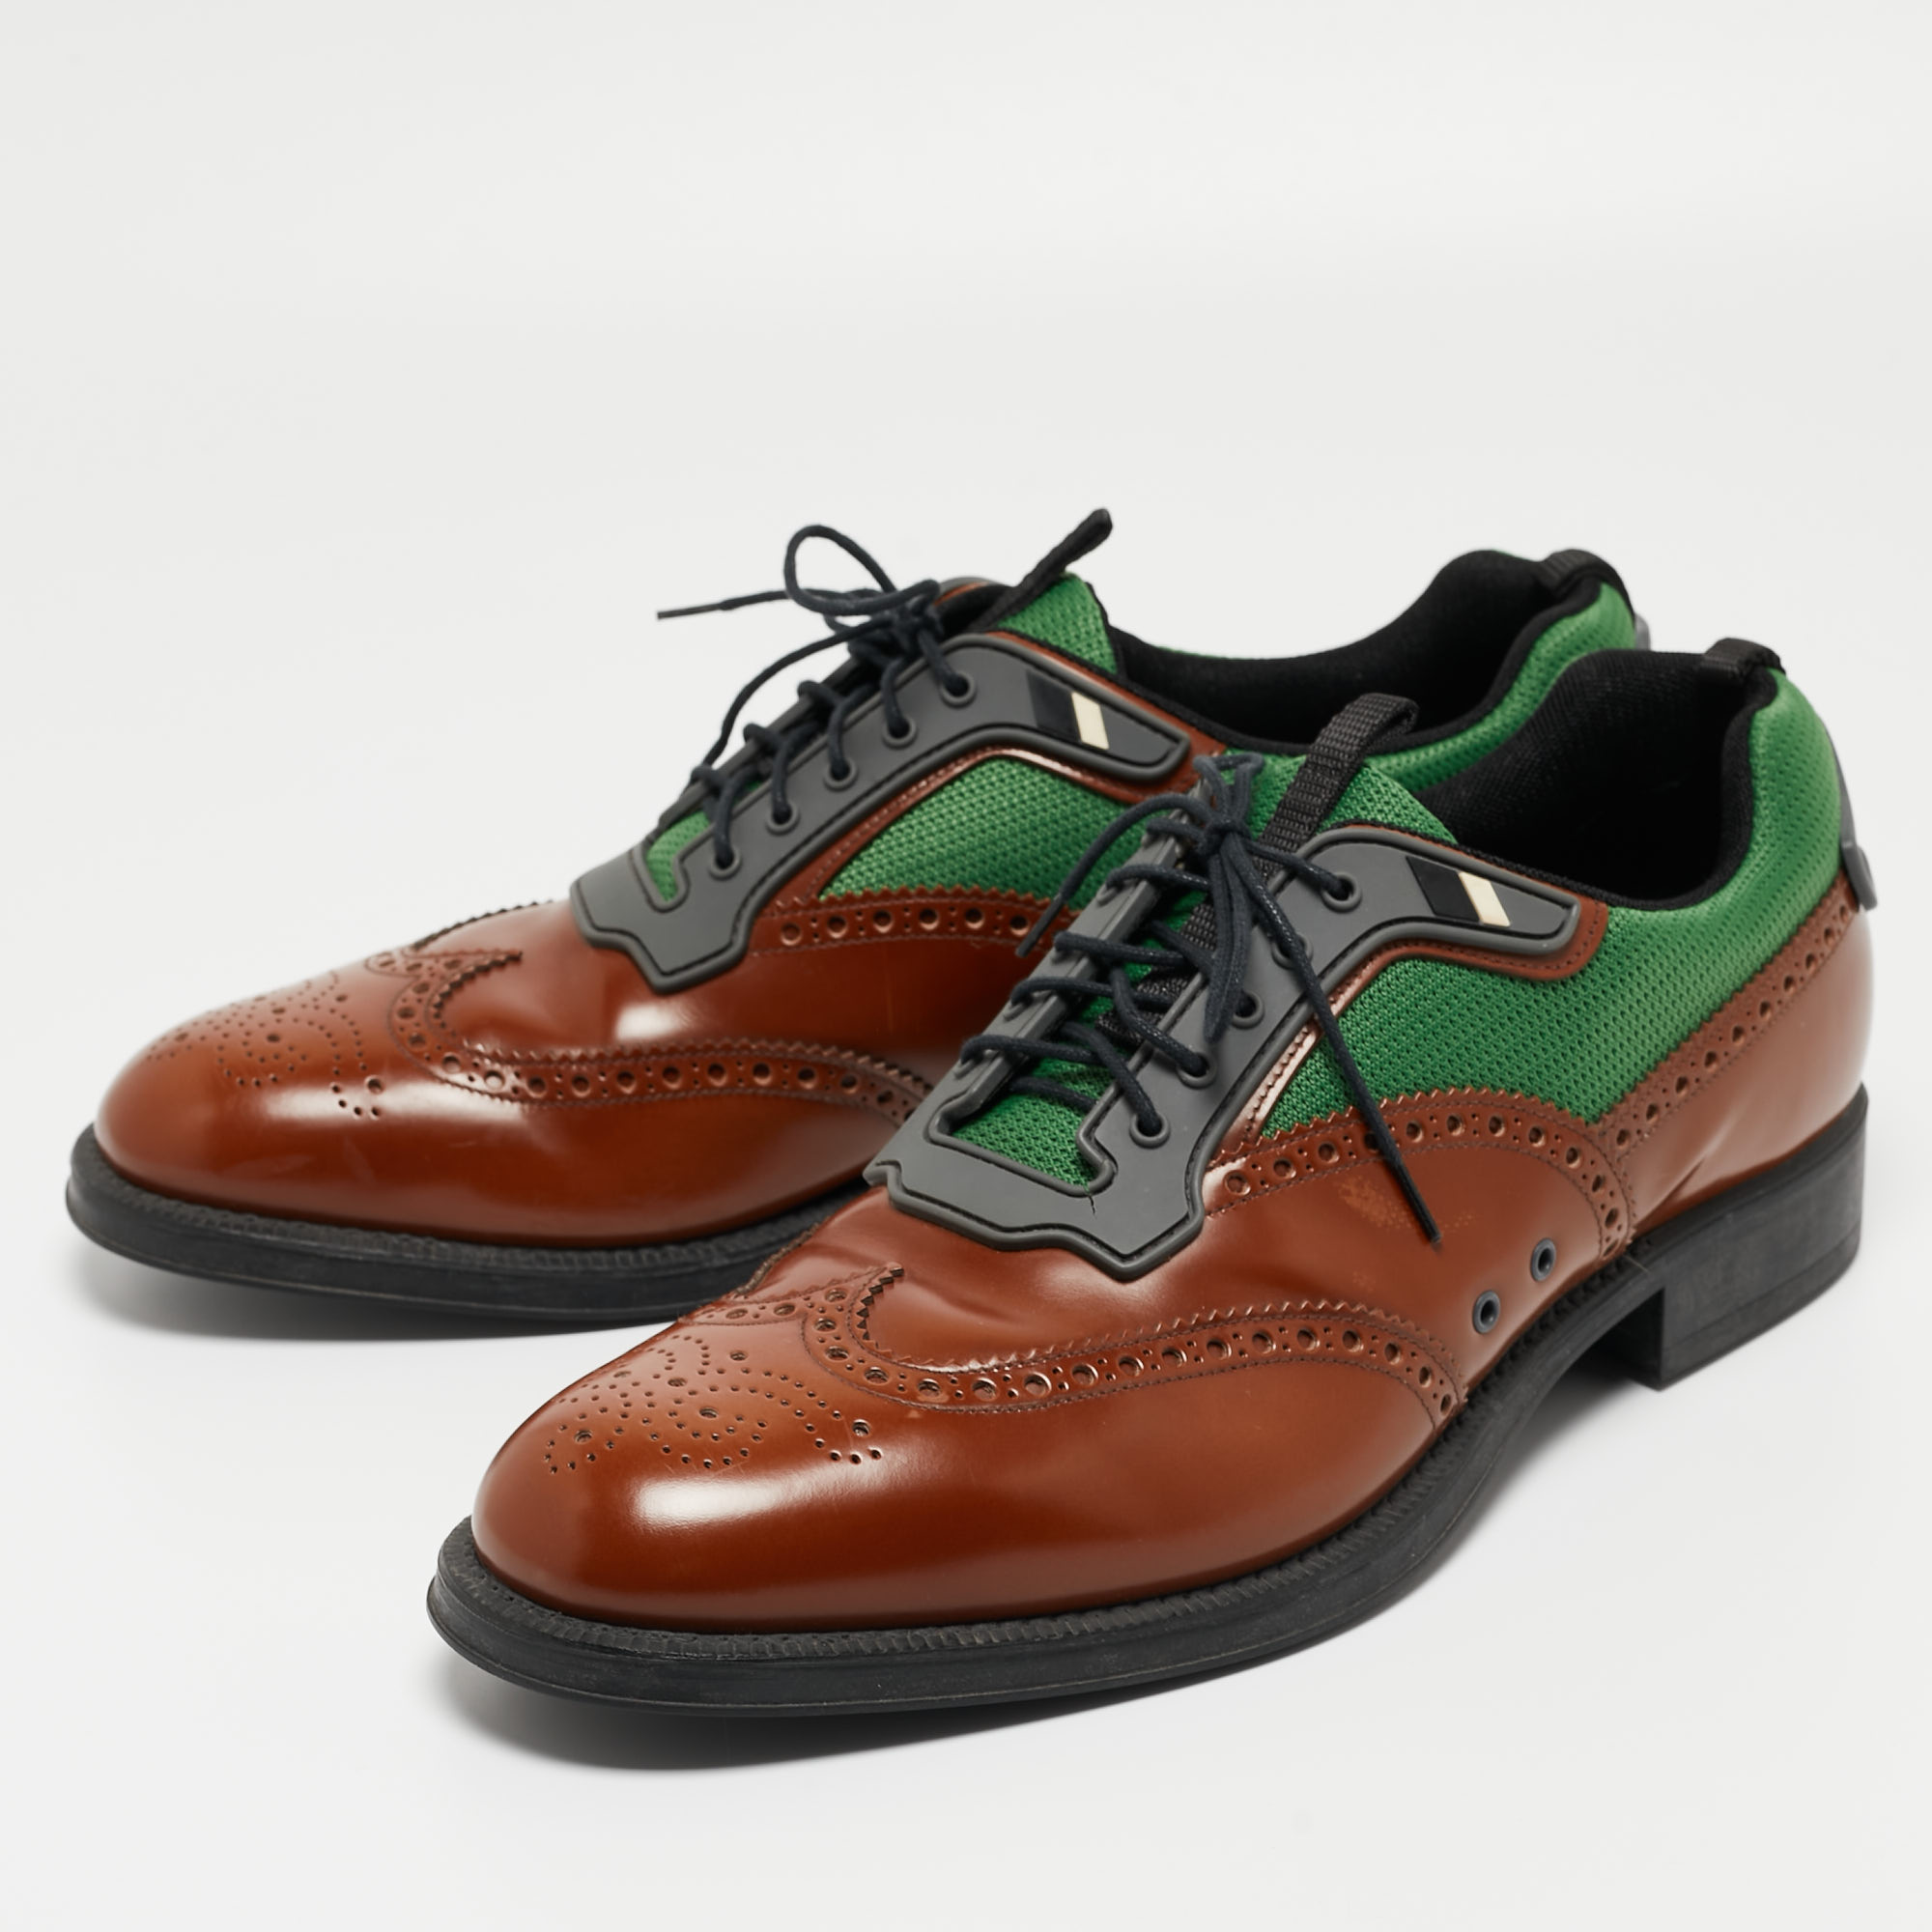 

Prada Tricolor Brogue Leather and Mesh Lace Up Oxfords Size, Brown